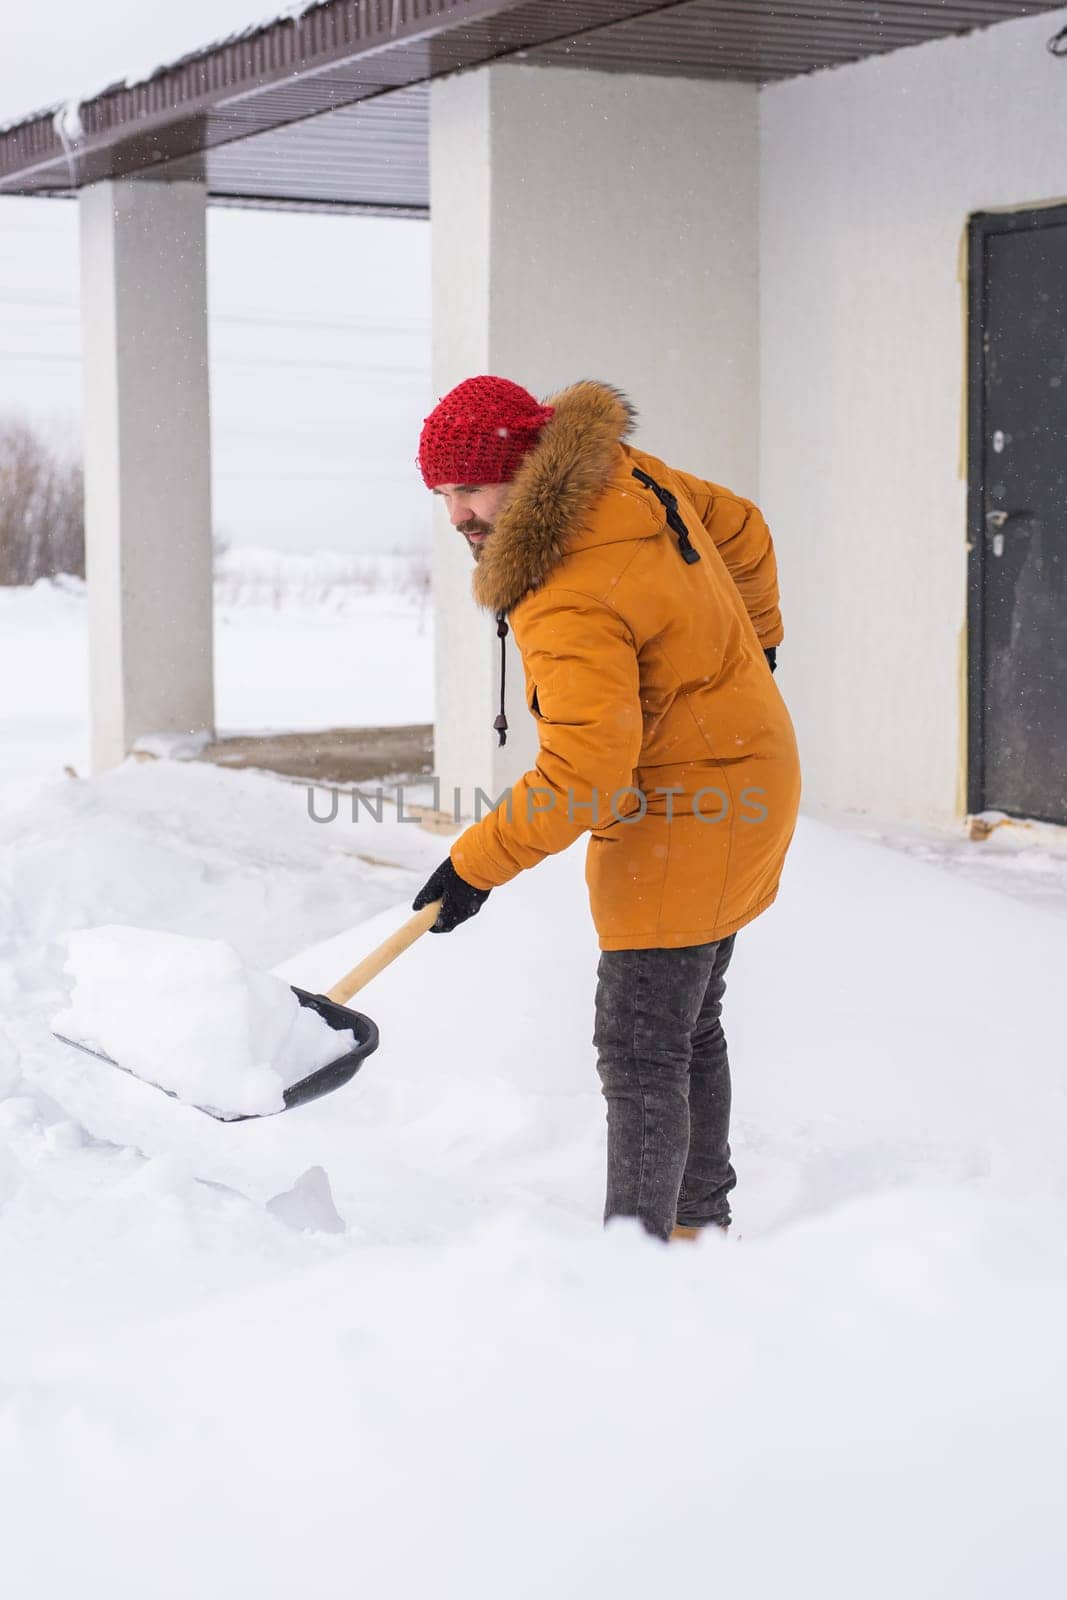 Man removing snow and ice from the sidewalk in front of house. Winter season by Satura86